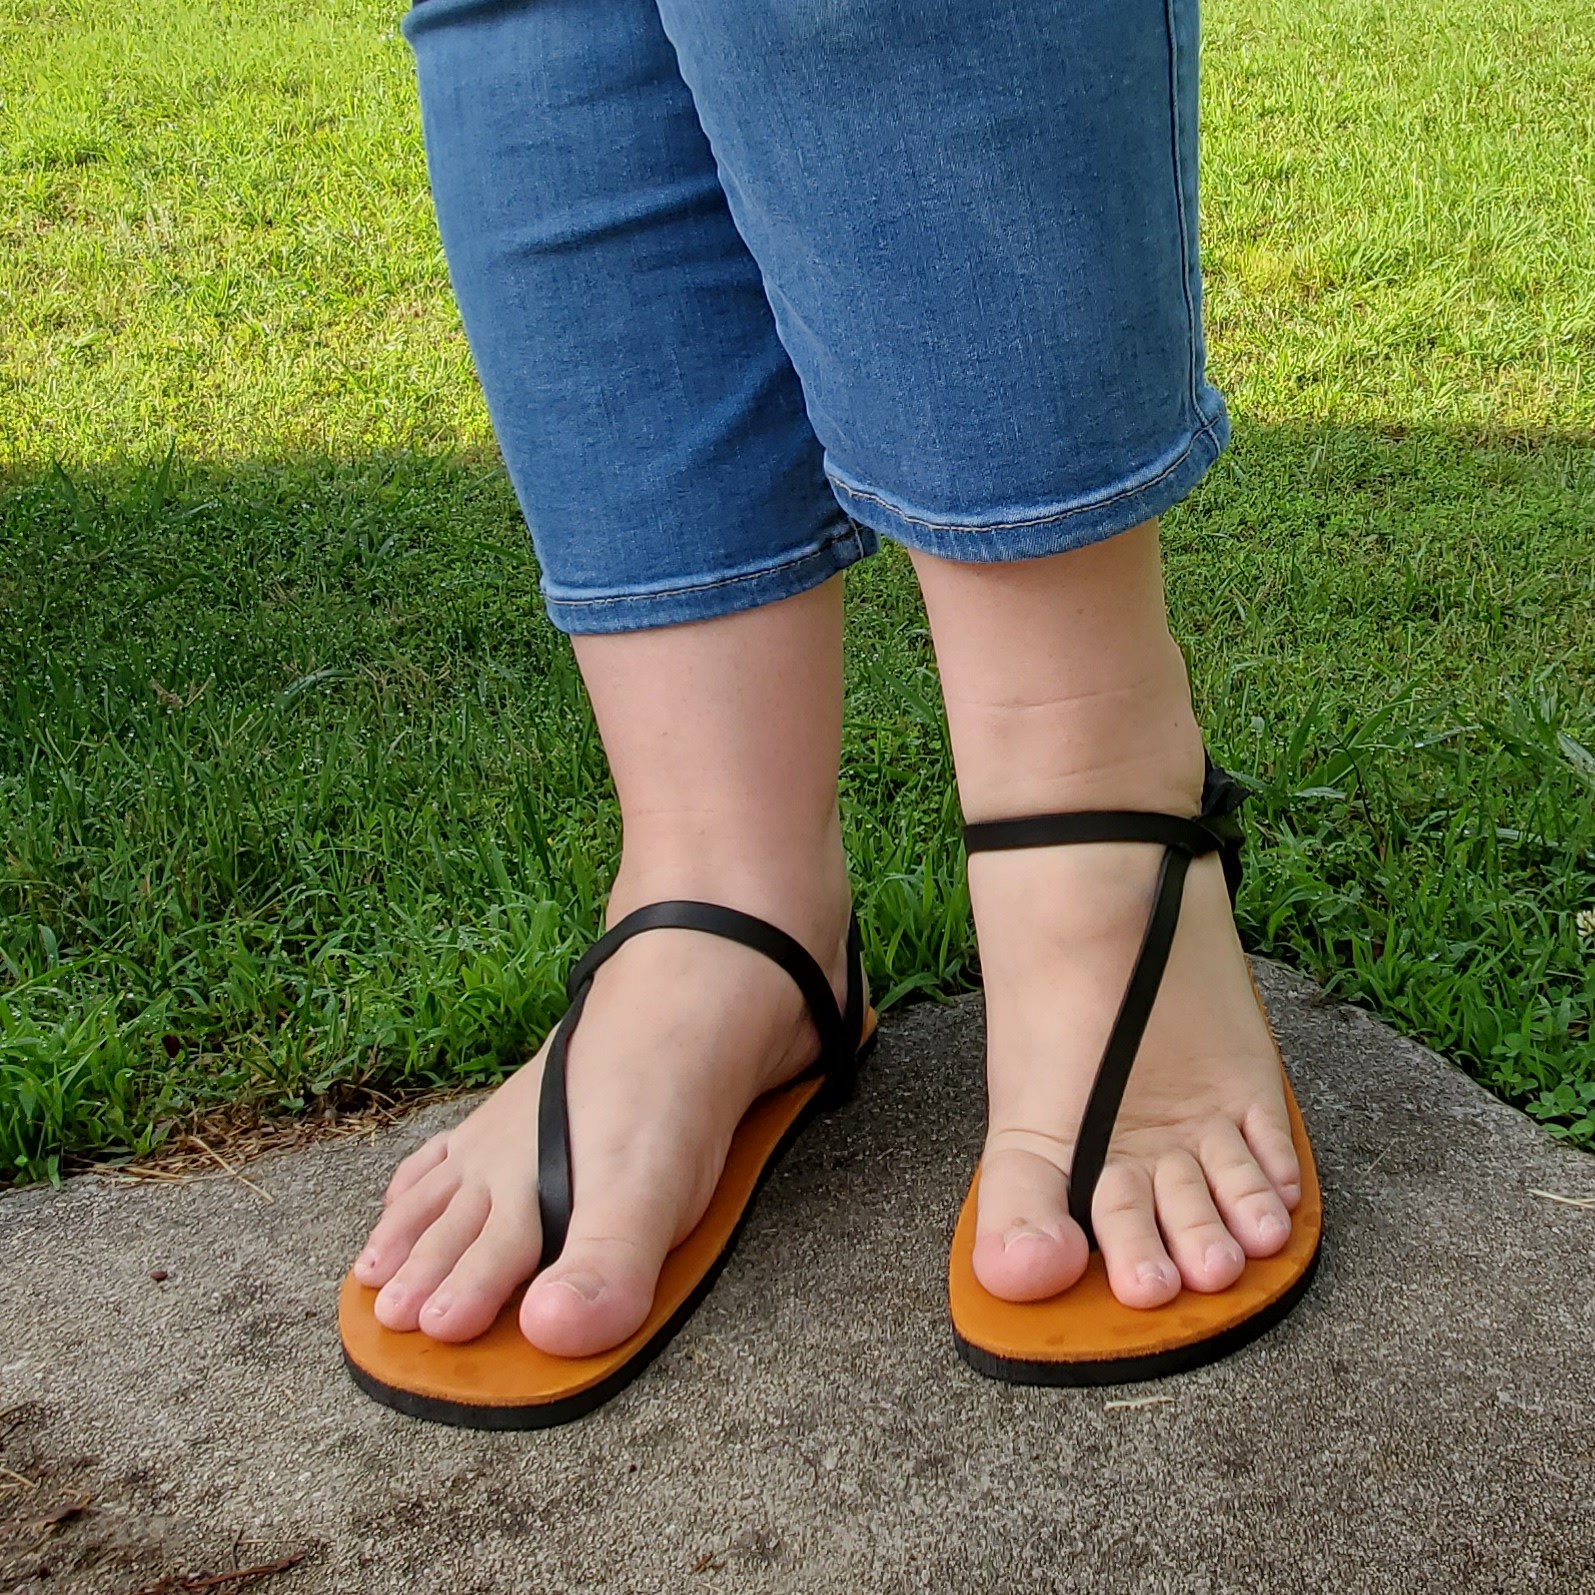 Luna Roots / Rooted Brujita Barefoot Sandals – A Full Review | Obsessed ...